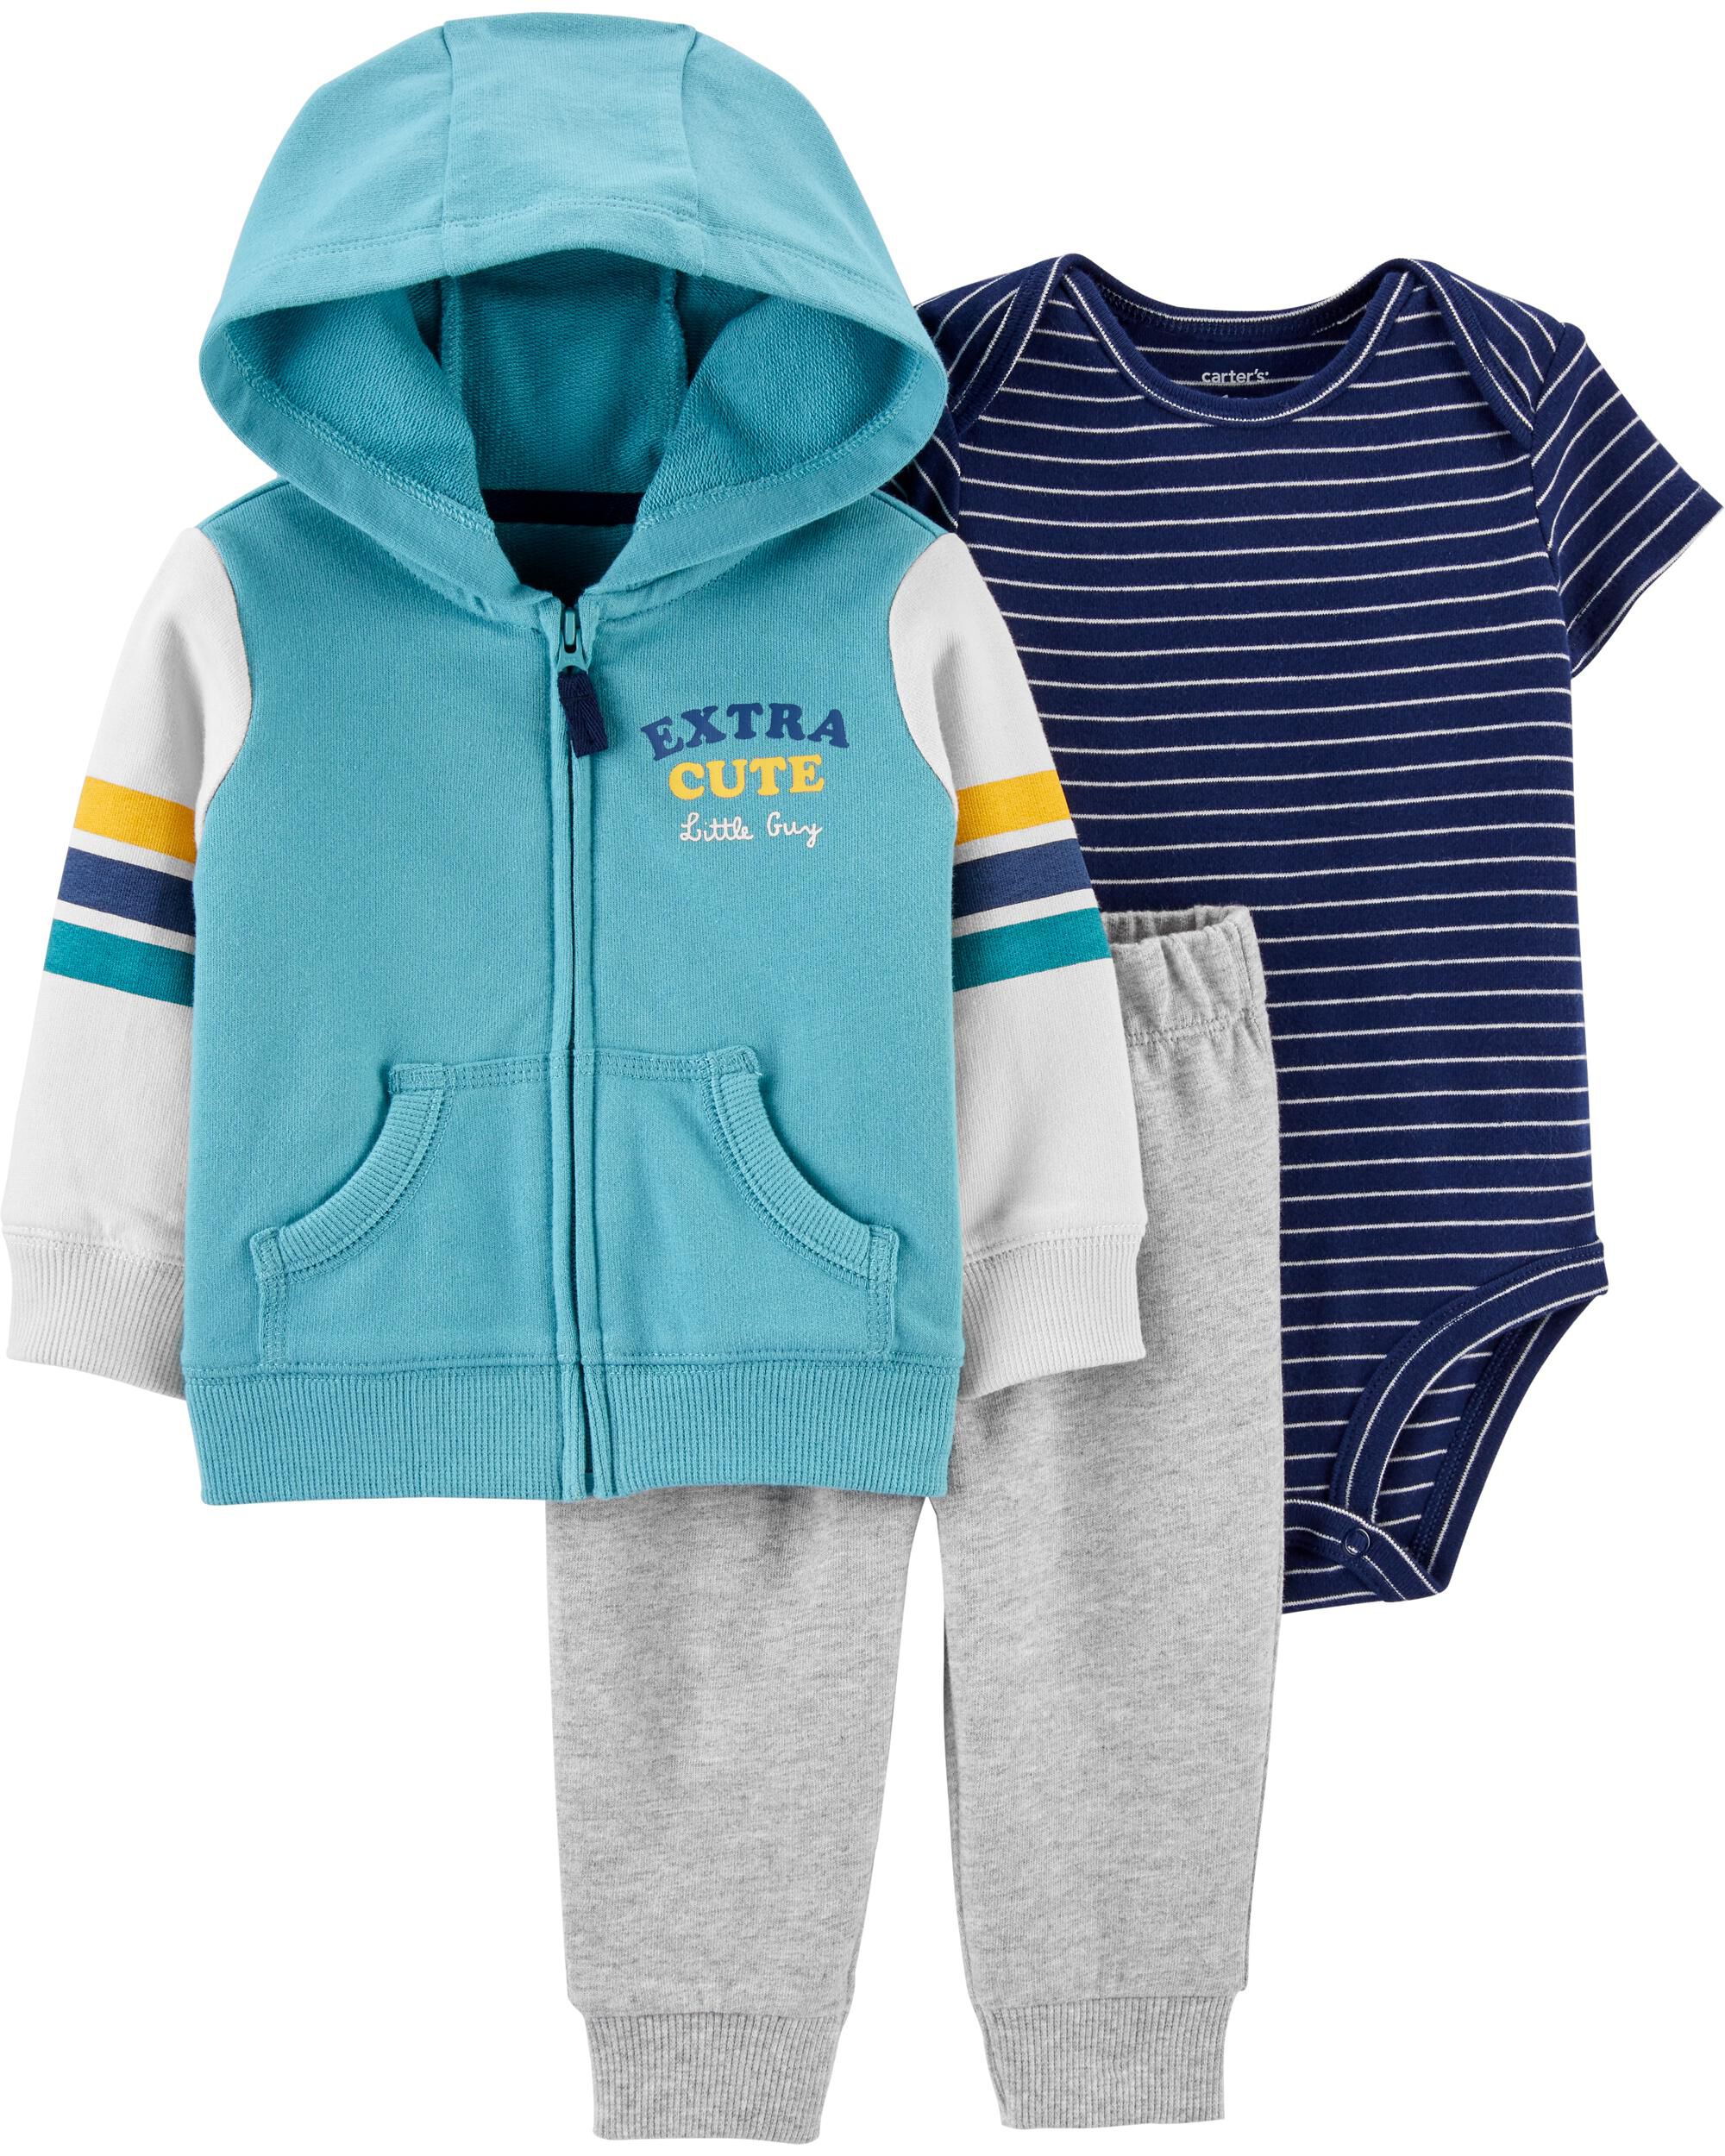 baby boy outfit sets